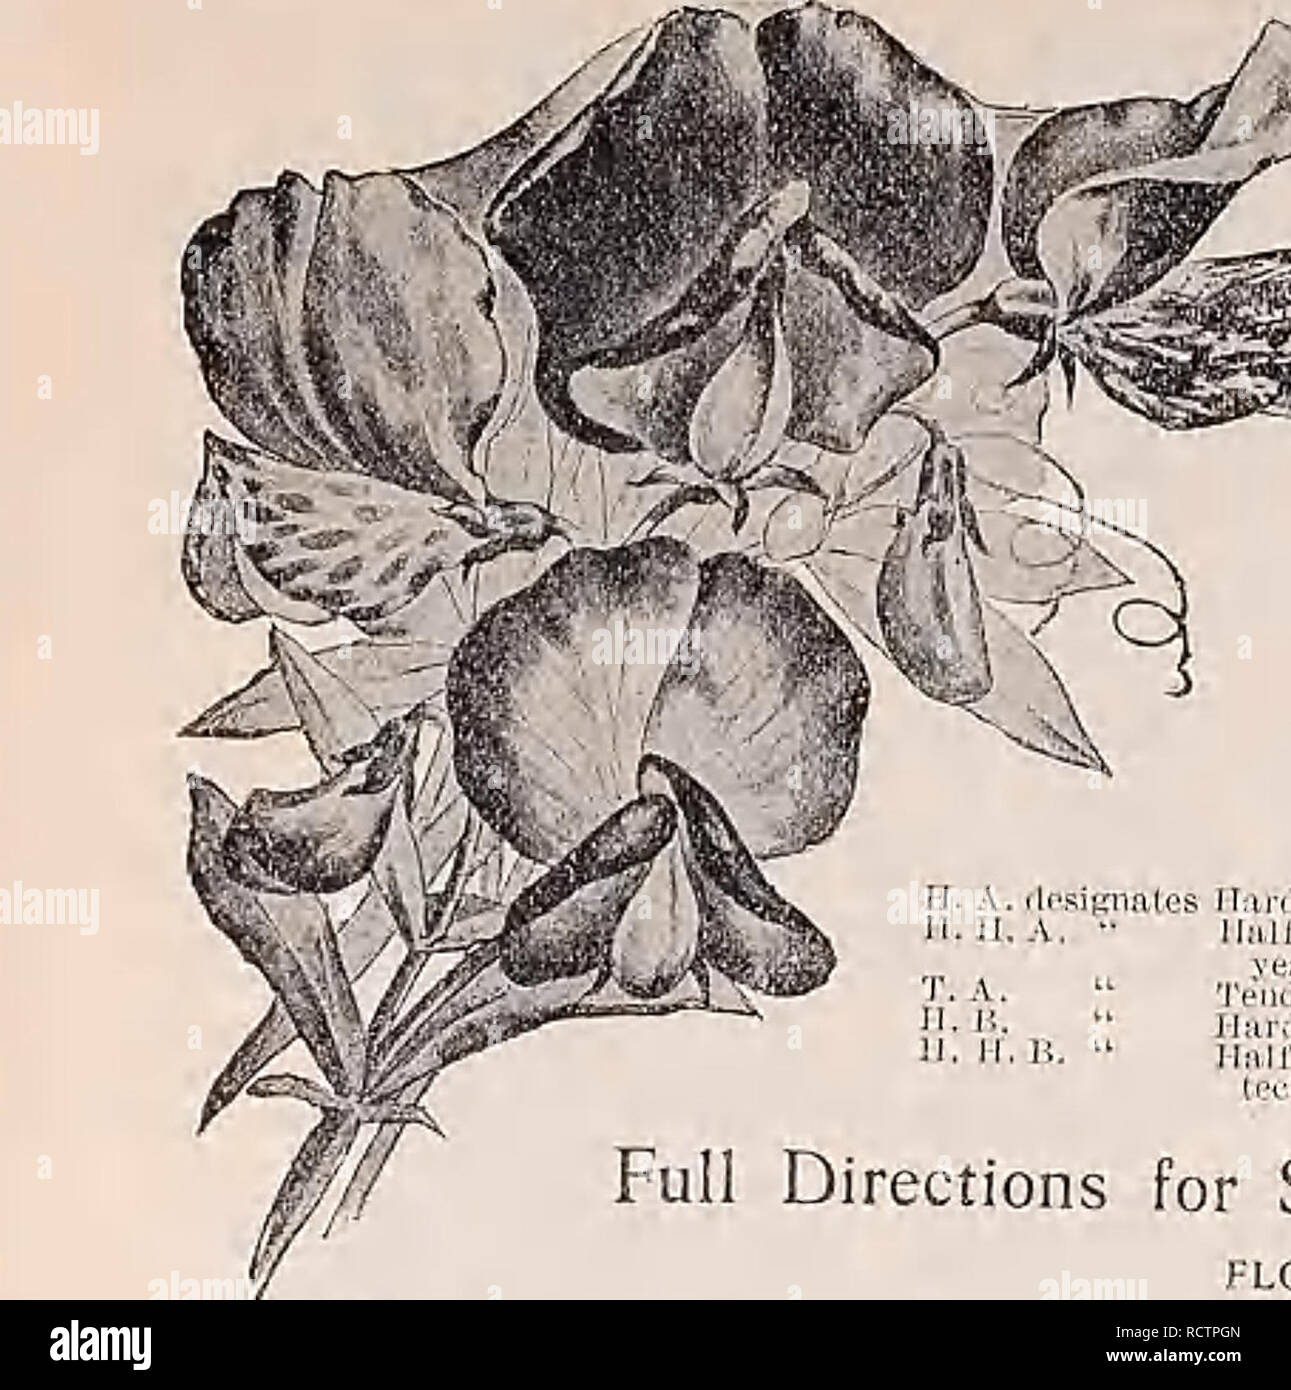 . Descriptive catalogue of vegetable, flower, and farm seeds. Nurseries (Horticulture); Nursery stock; Seeds; Bulbs (Plants); Gardening; Equipment and supplies; Bedding plants; Weeber &amp; Don. WEEBER &amp; DON 3D Flower Seeds. ANTIRRHINUM (Snapdragon) until Giant.Pure YV hitc. Pun?whilcK|.ik.«. Pkt. 10c. Tall Kose. Pkt. 5a. 'fall Scarlet. Brilliant shade. Pkt. 5c. Tii 11 White. Bountiful pure . Pkt. 5c. Tall Yellow. Peltate £rfui- rose-yellow. Pkt. So, Tall Finest. Mixe.I. Pkt. 5c, oz. 50c. Qneen of the North. Hall dwarf, pure, white. Pkt. 10ft Dwarf. Finest Mixed. The dwart sorts are excel- Stock Photo